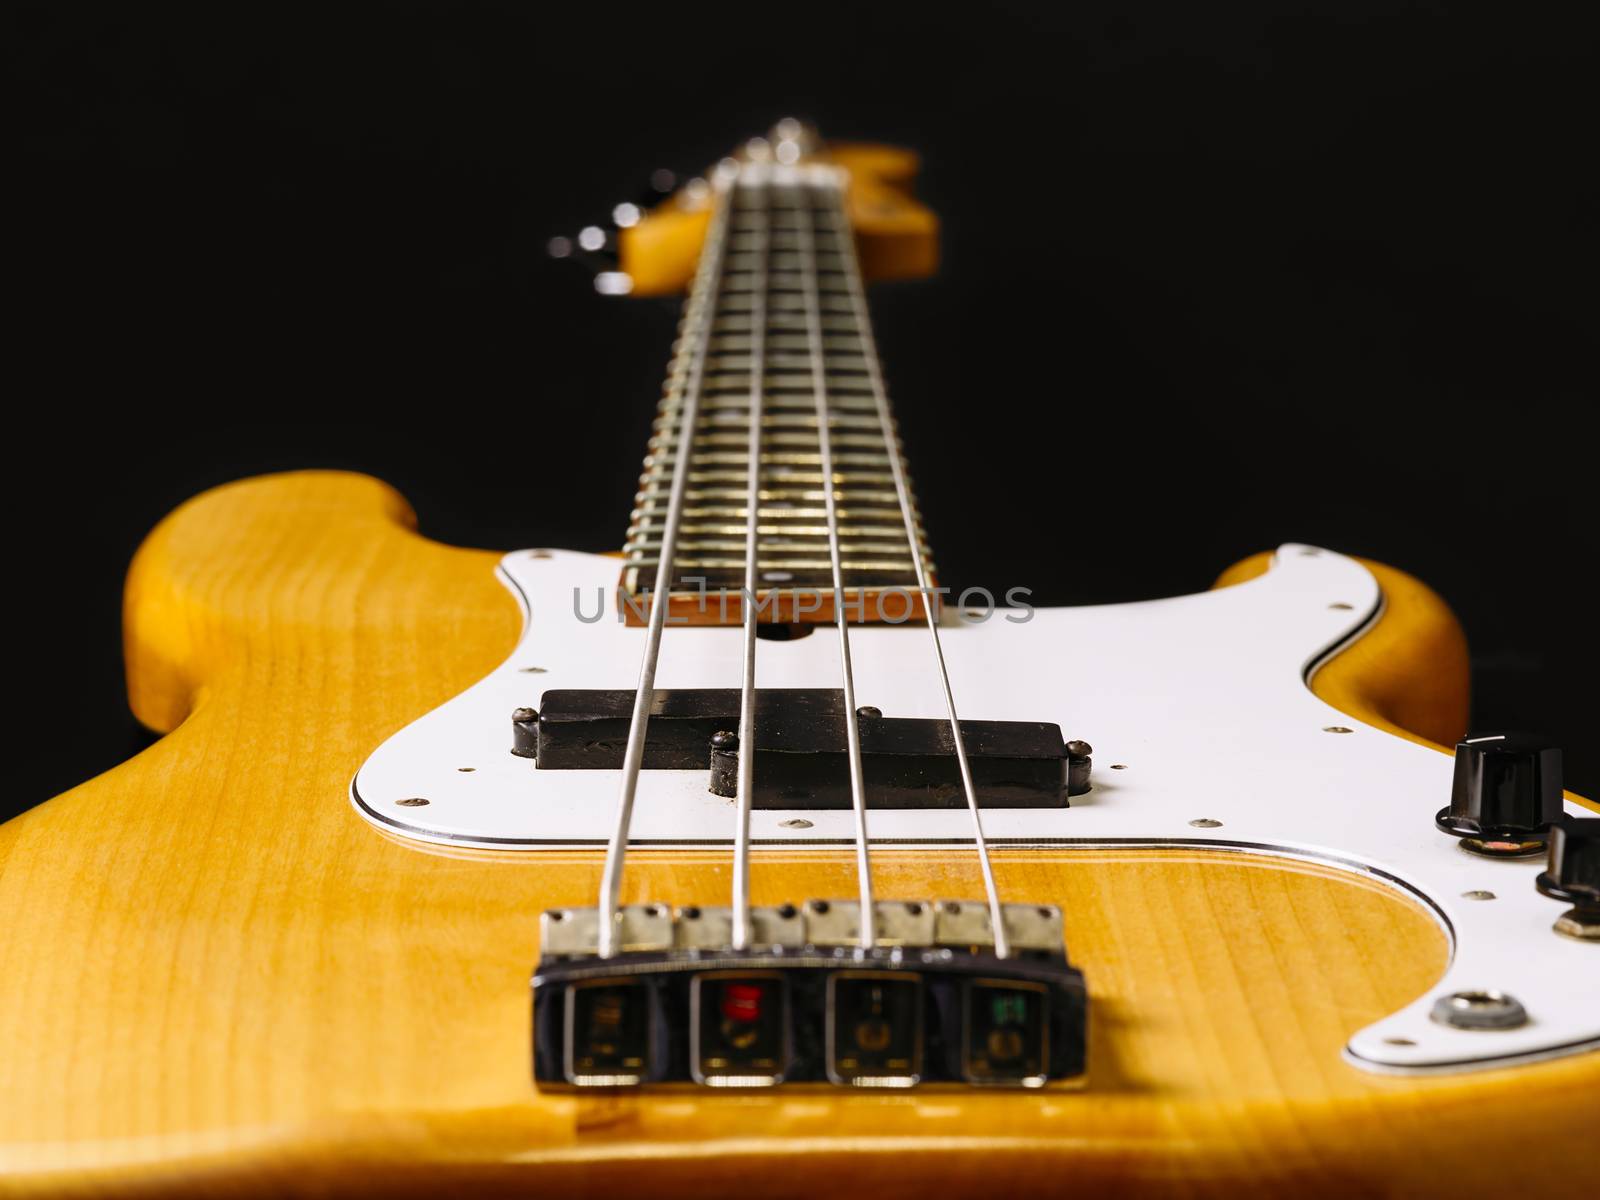 Photo of a electric bass guitar showing perspective from bottom to the headstock. Focus across middle.